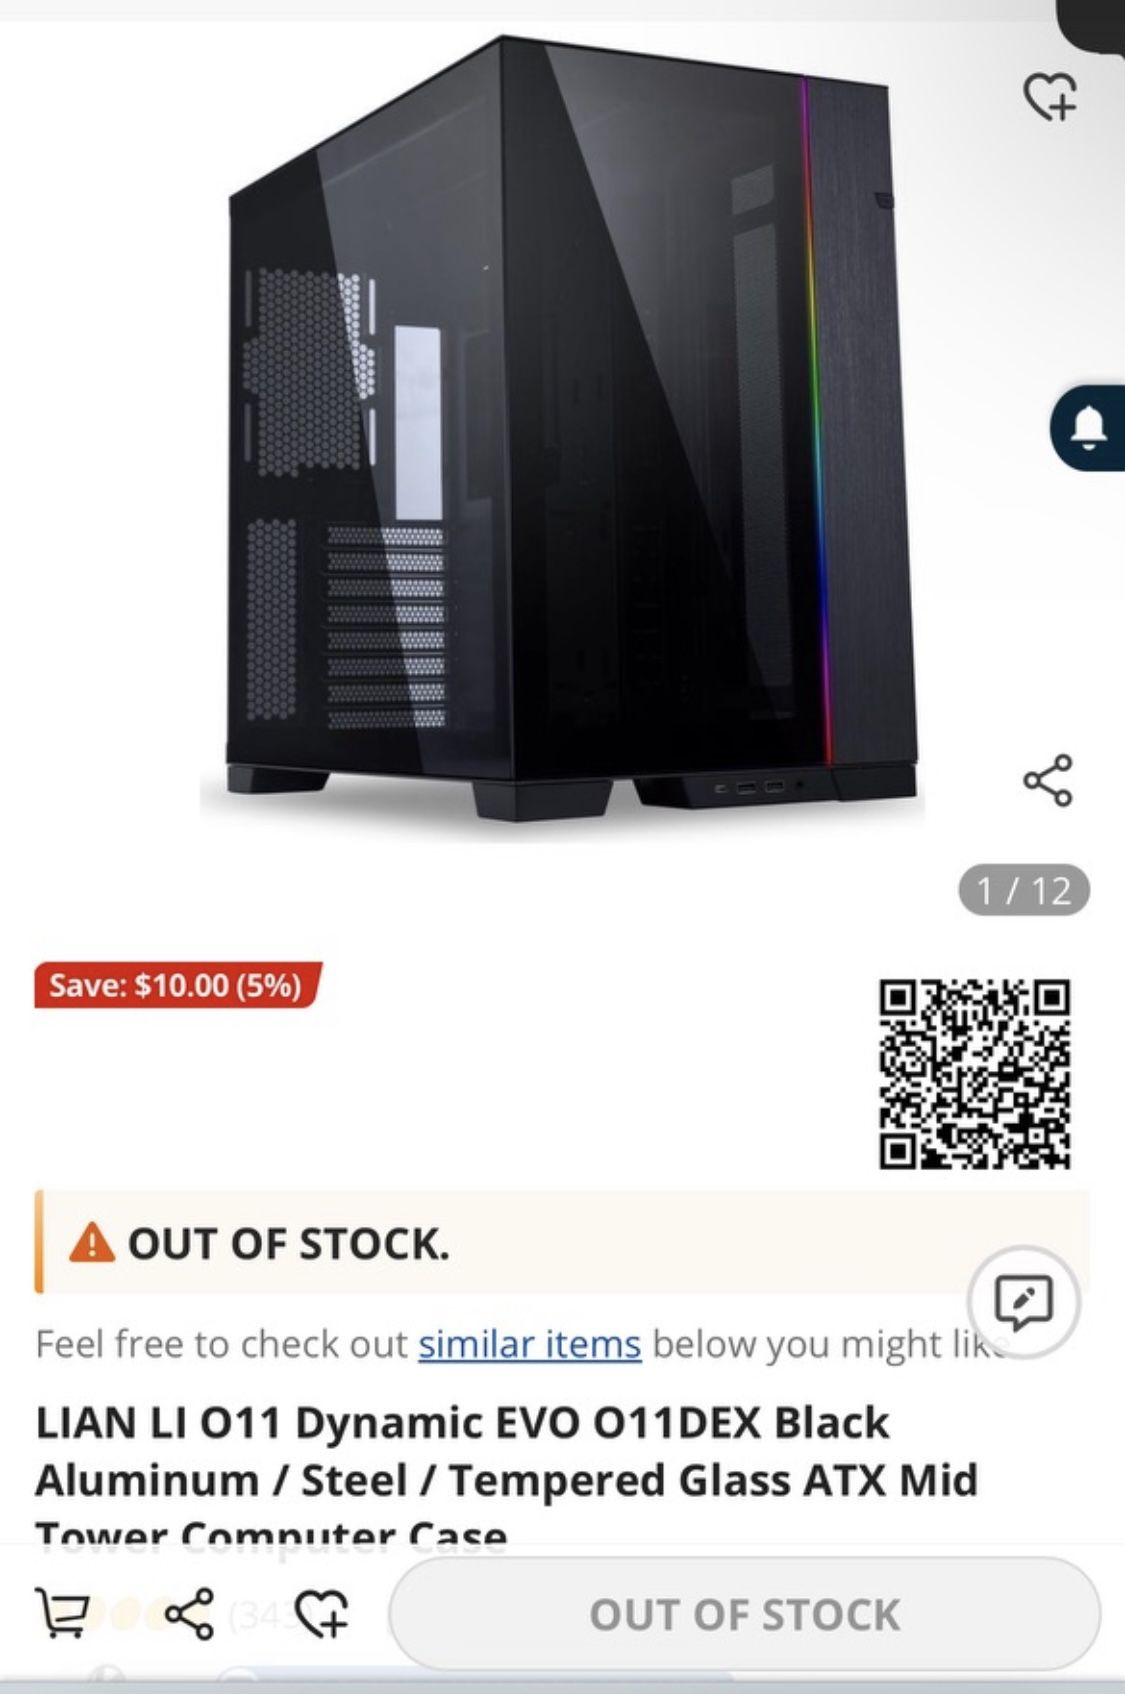 PC Case (New Never Opened)